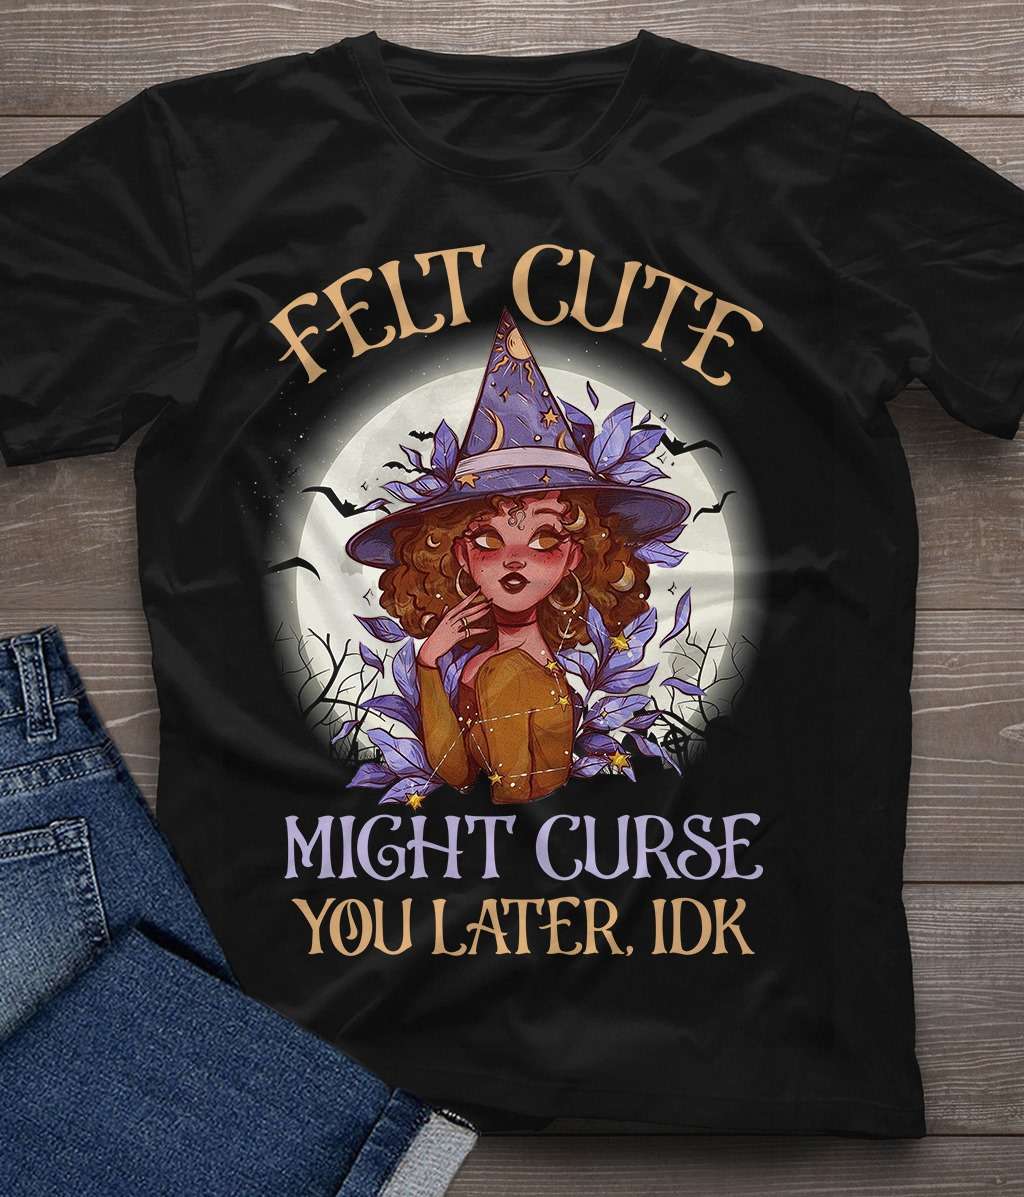 Cute Witch Girl - Felt cute might curse you later idk